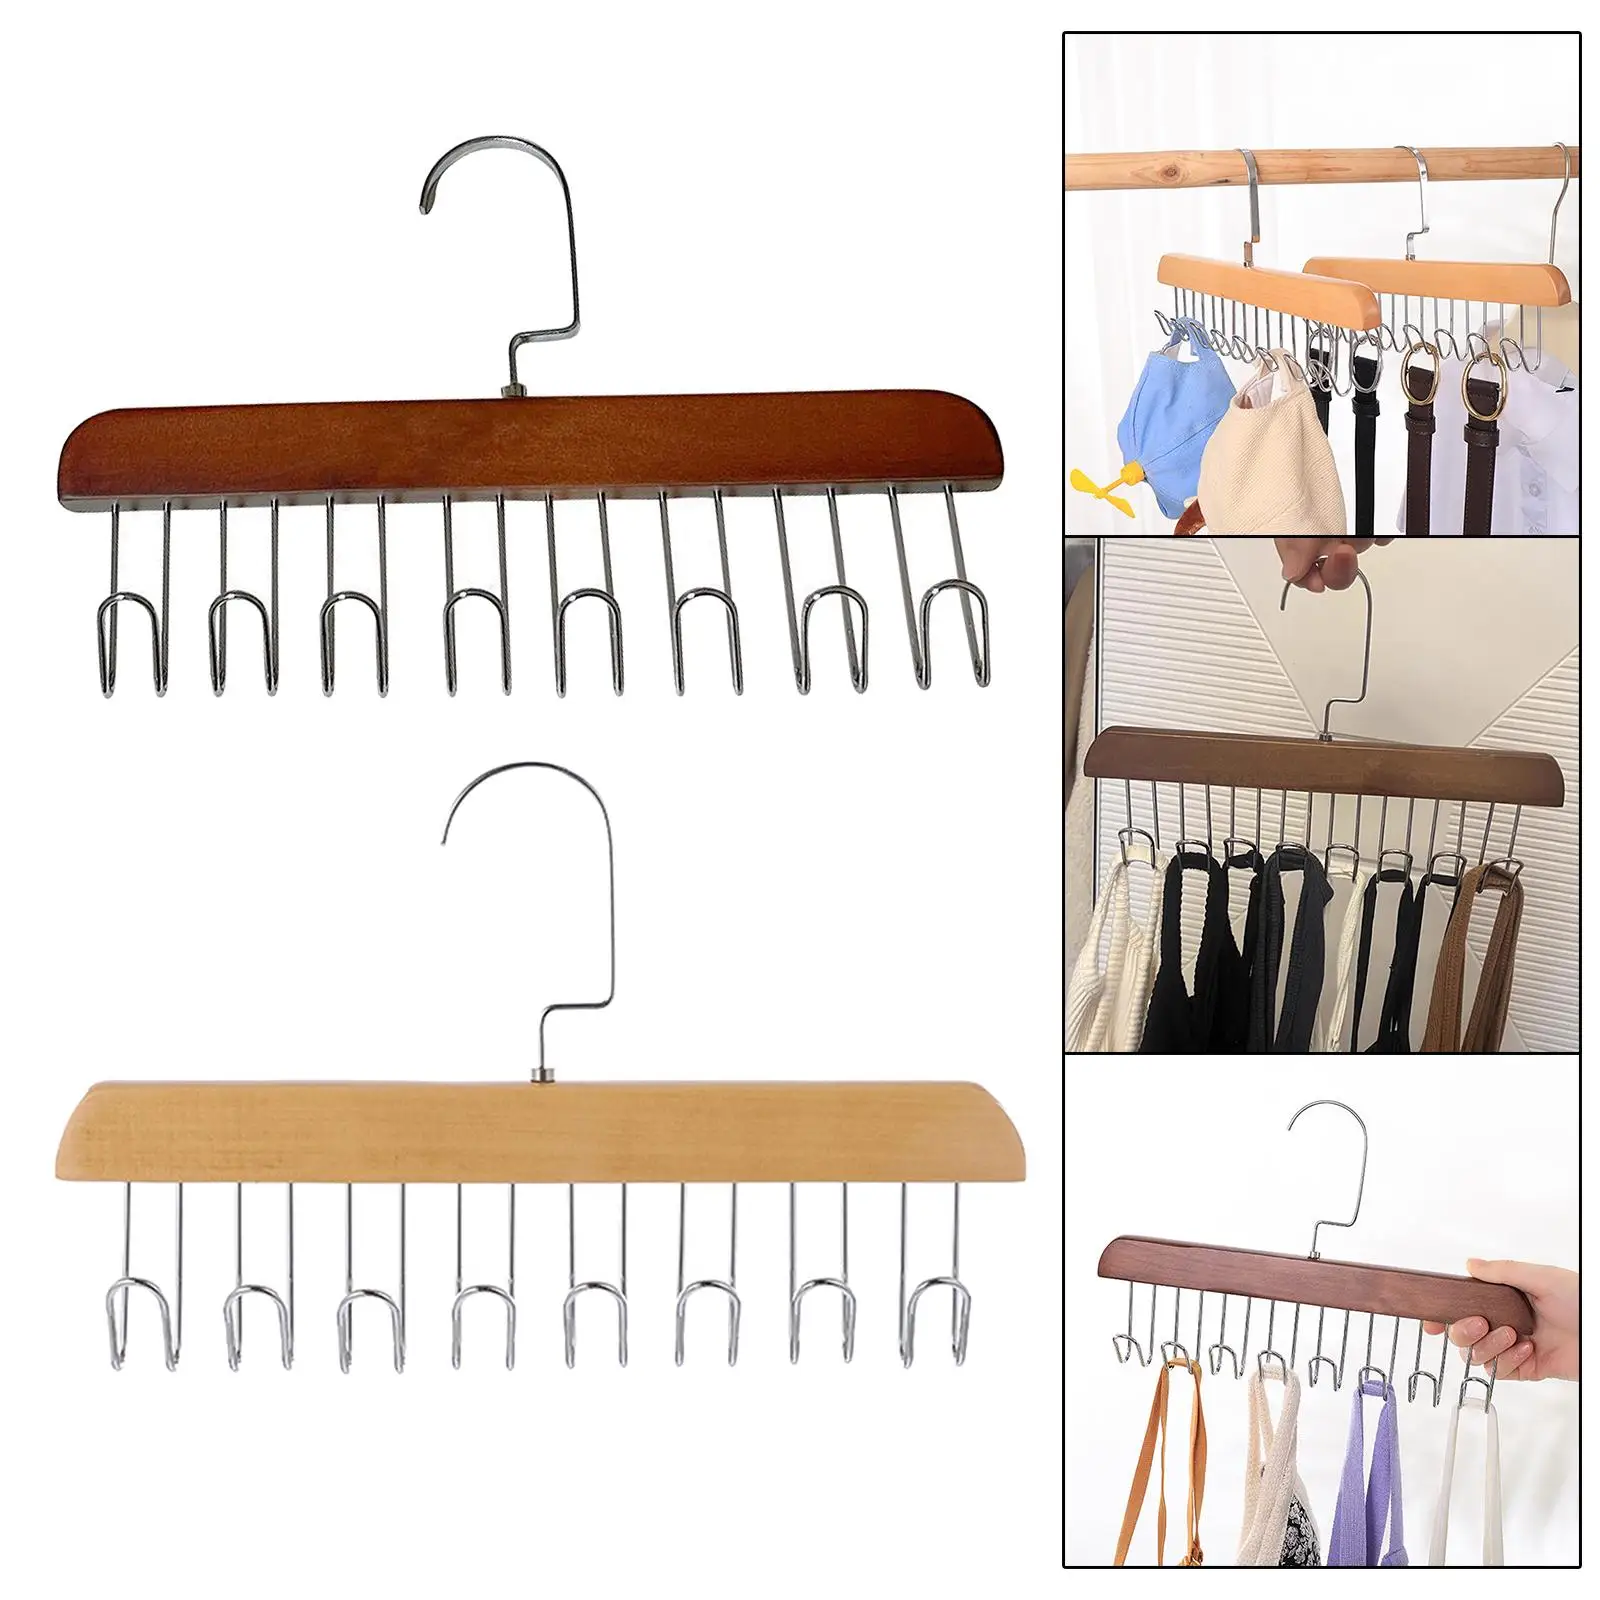 Wooden Tie Hanger Durable Space Saving with 8 Hooks Wardrobe Tie Holder Hanging Organizer for Bags Tank Tops Hats Scarves Belts